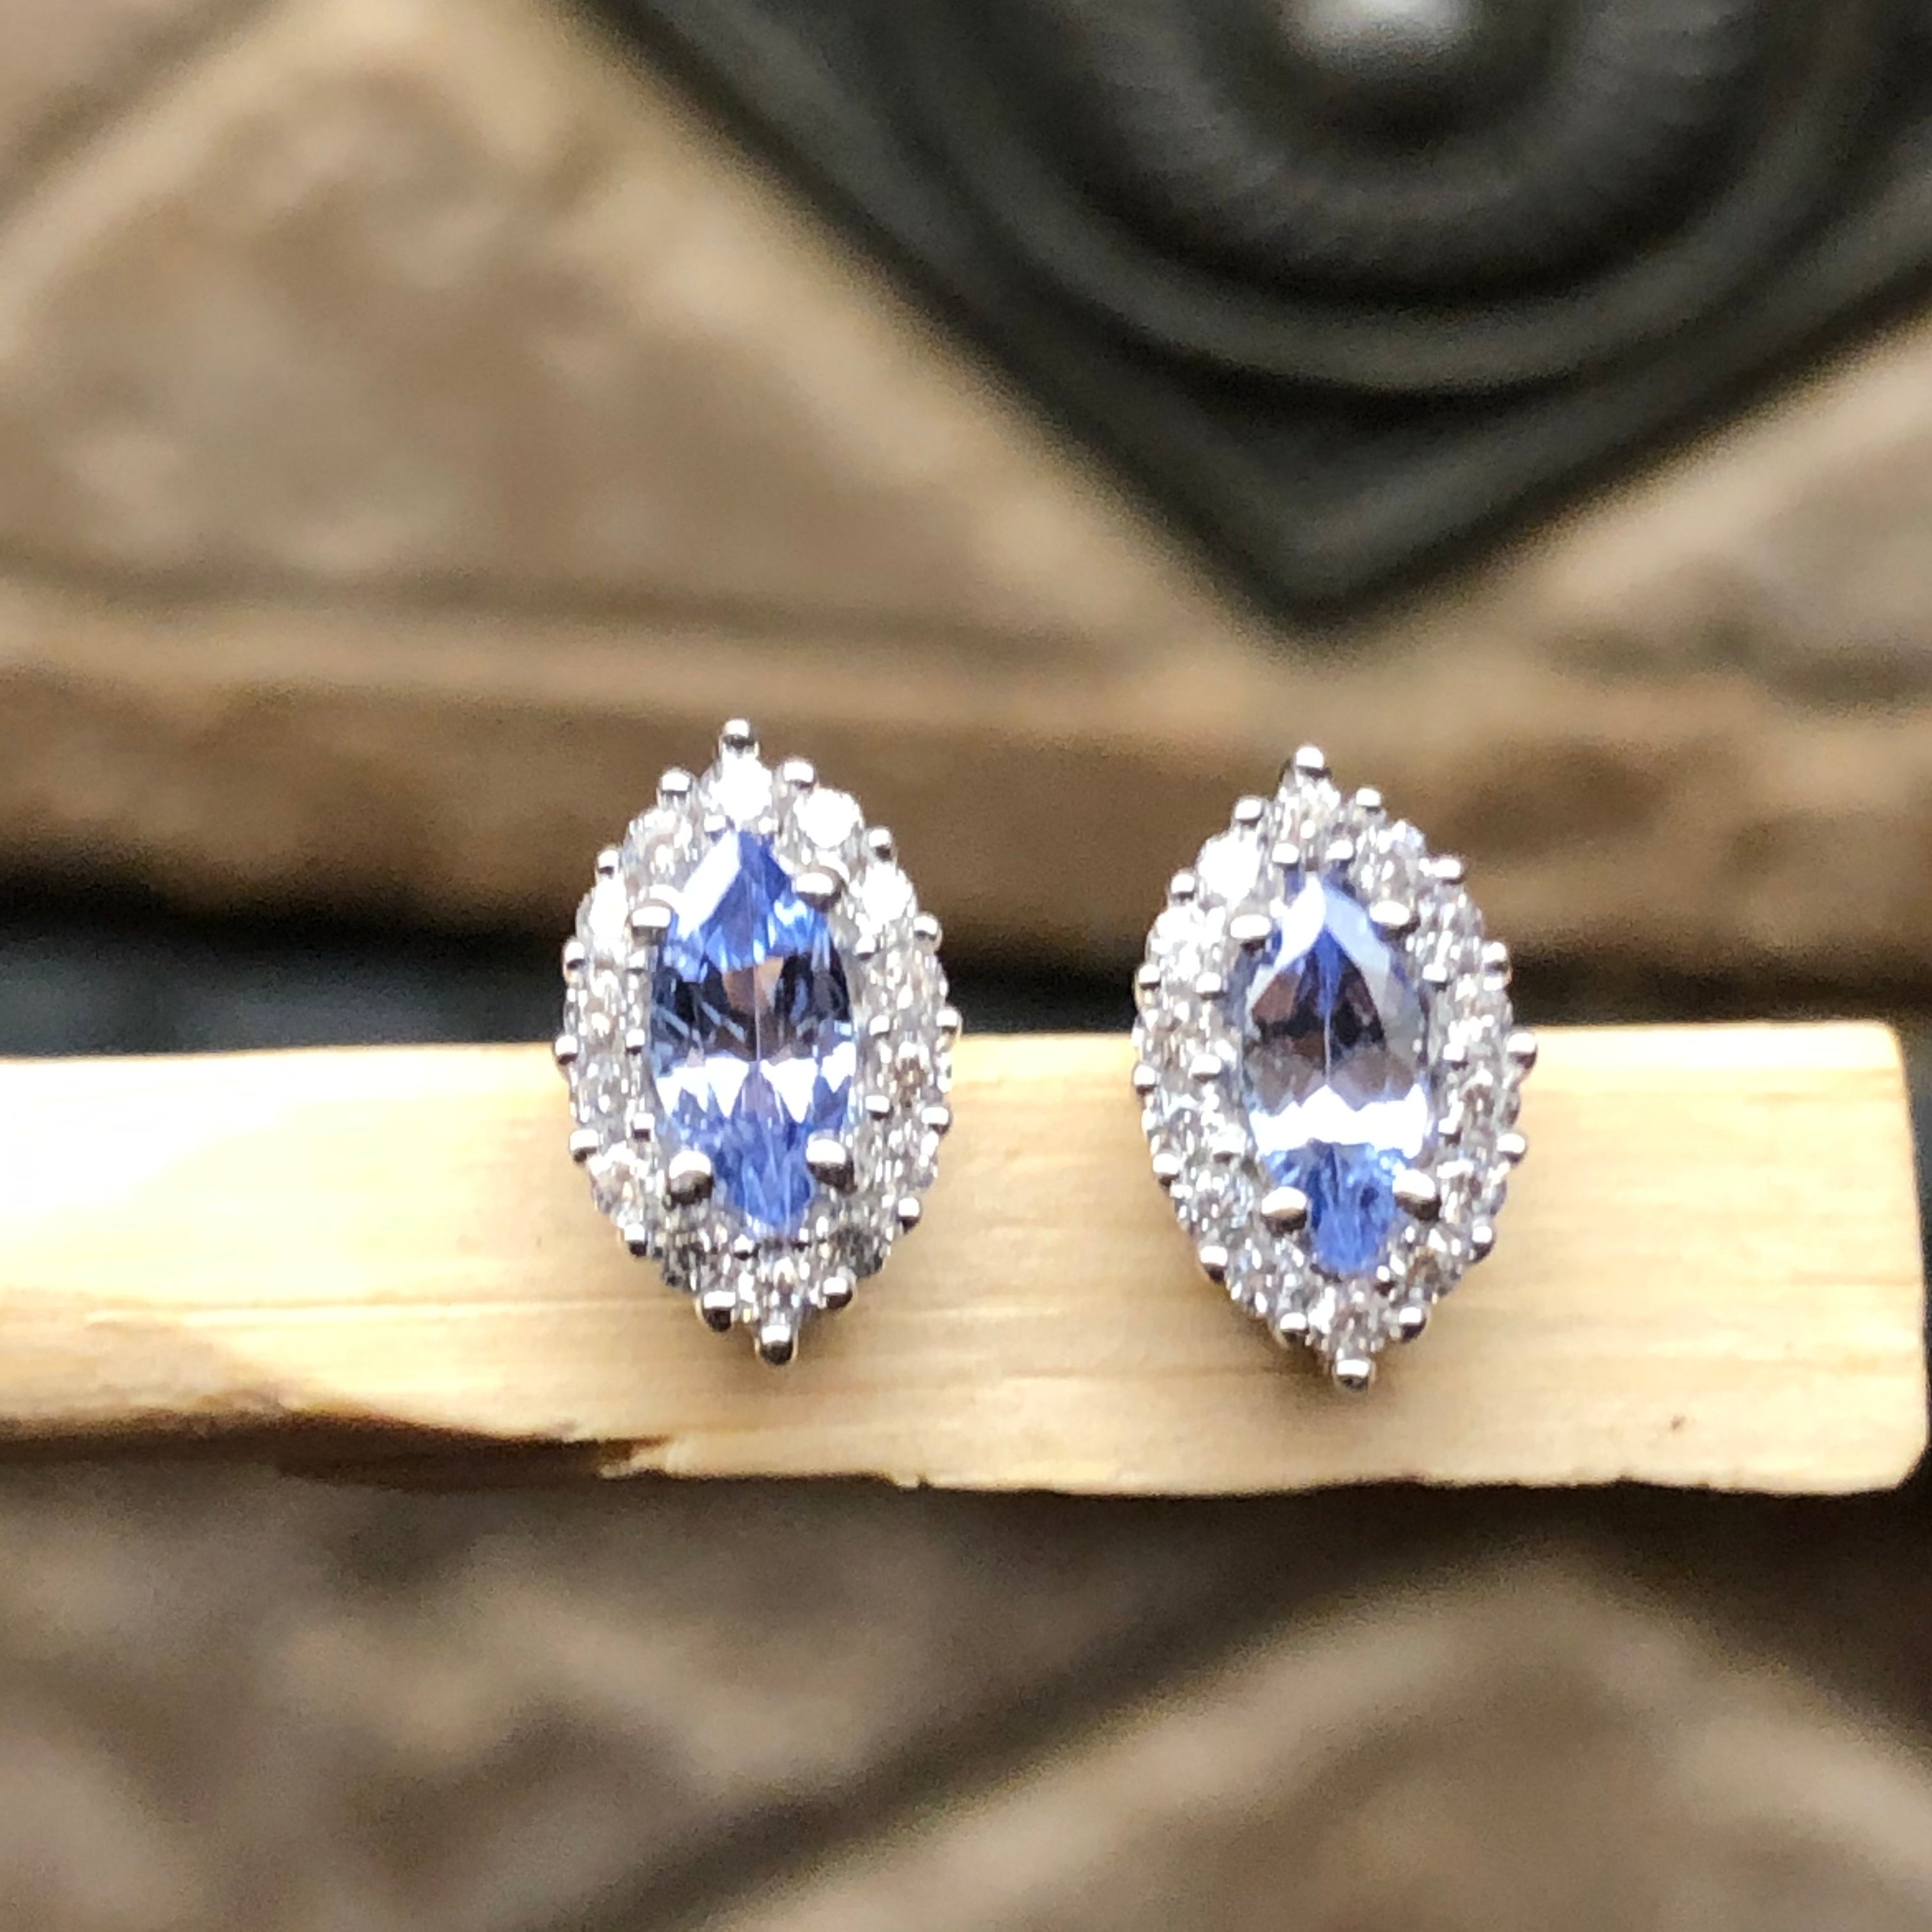 Natural Blue Tanzanite 925 Solid Sterling Silver Earrings 10mm - Natural Rocks by Kala